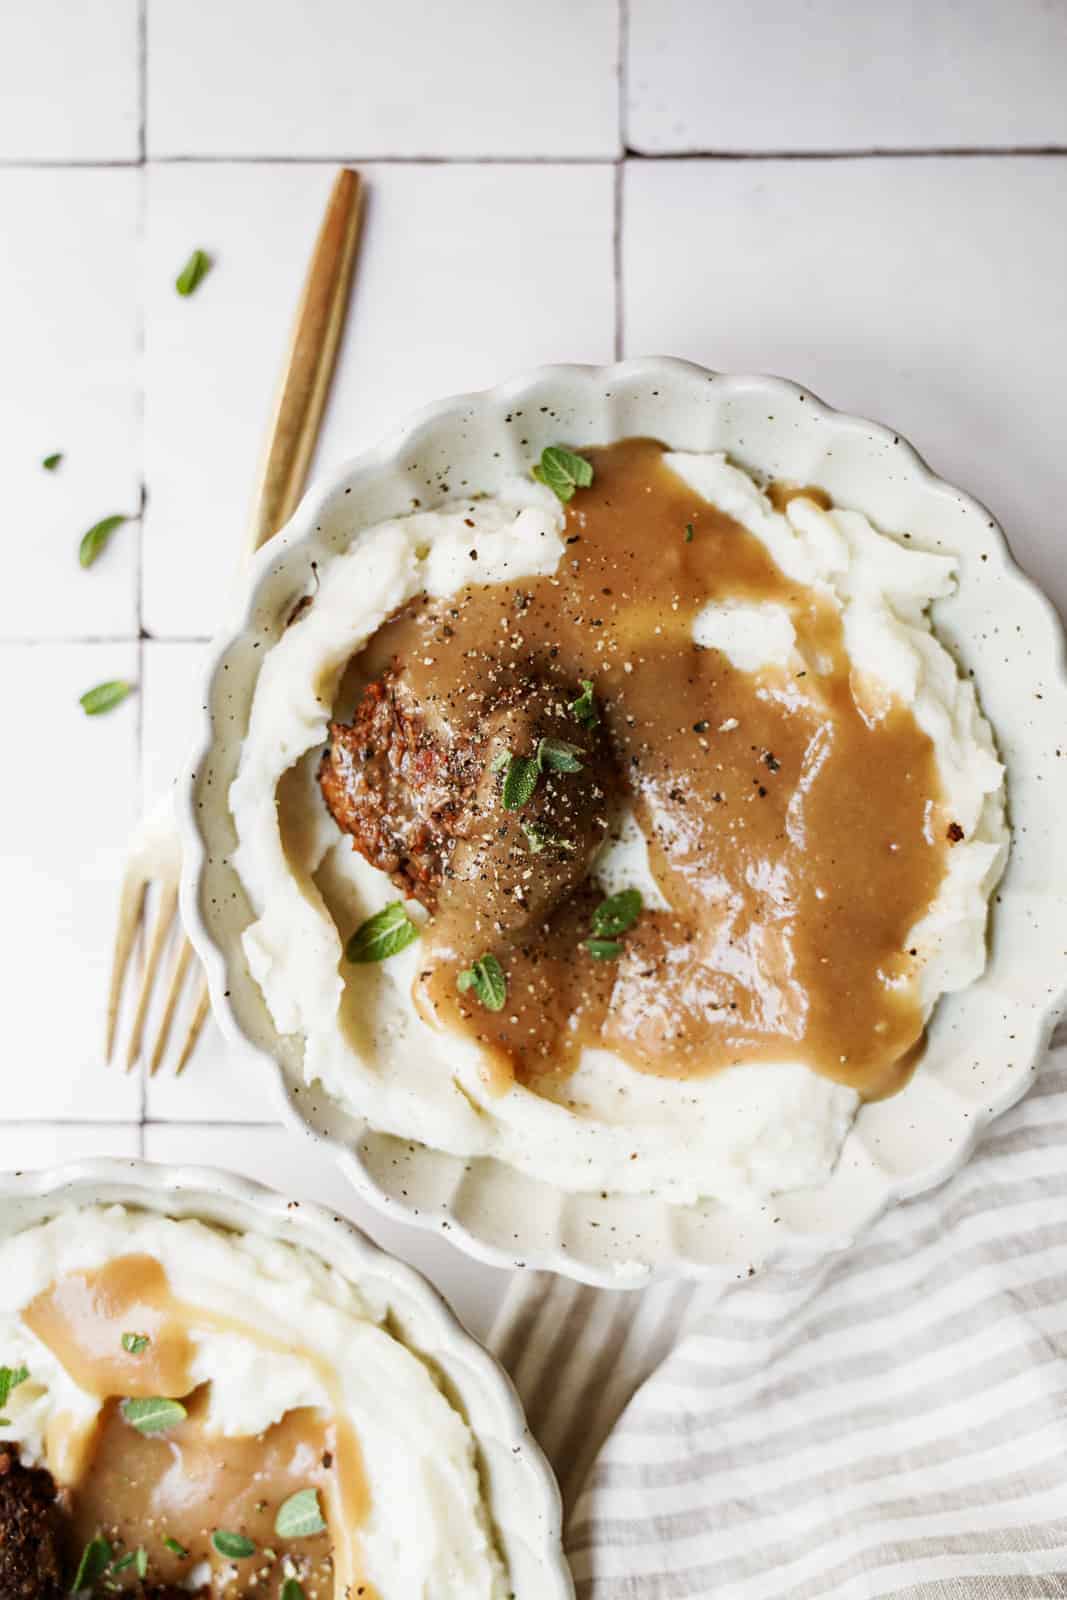 Vegan meatballs with a side of vegan mashed potatoes and gravy on countertop.